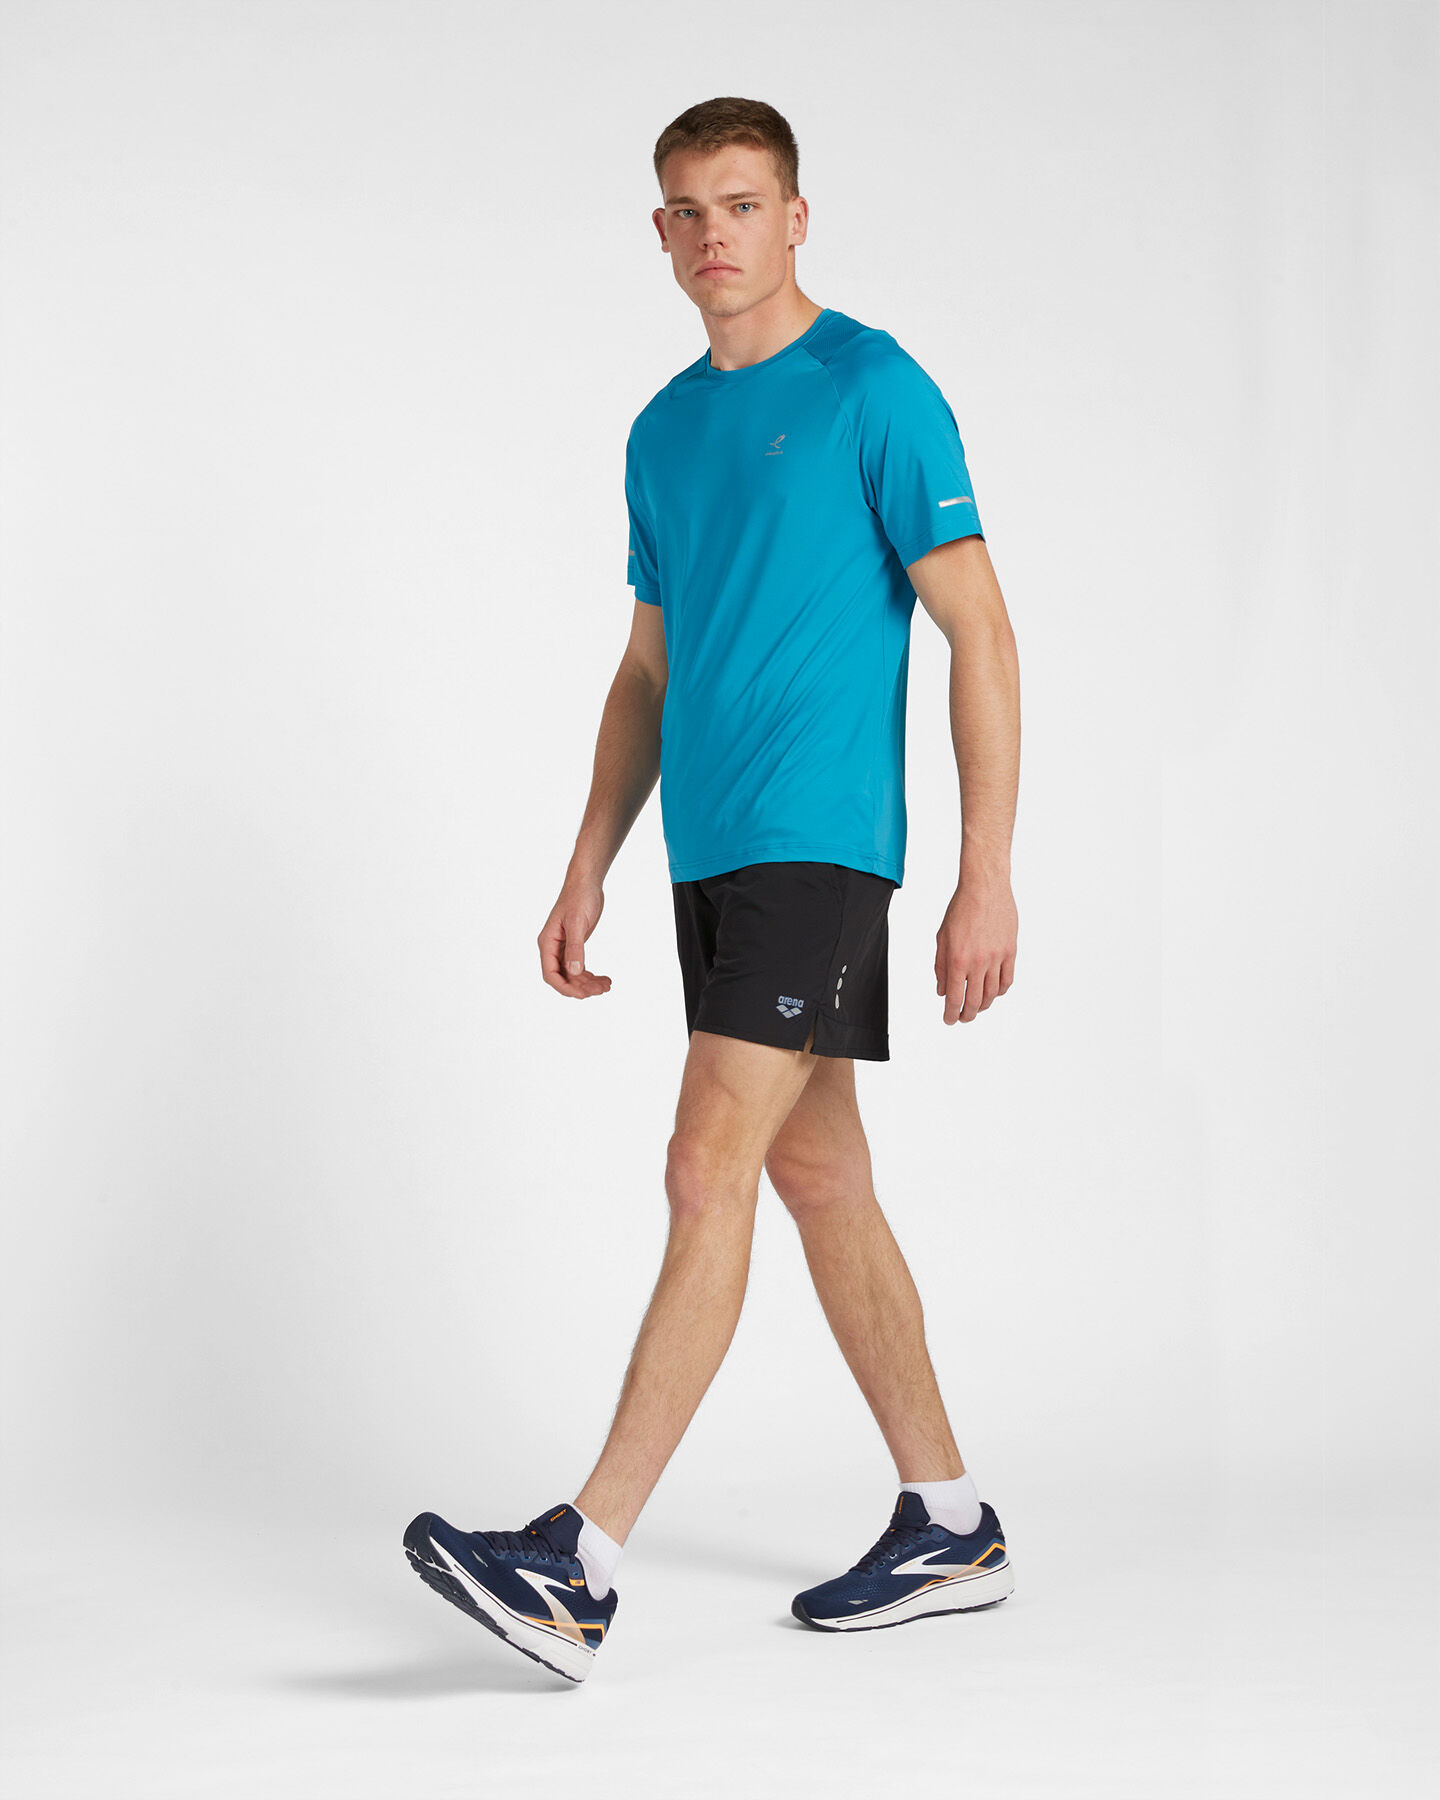  T-Shirt running ENERGETICS MUST HAVE M S5510772|612|L scatto 3